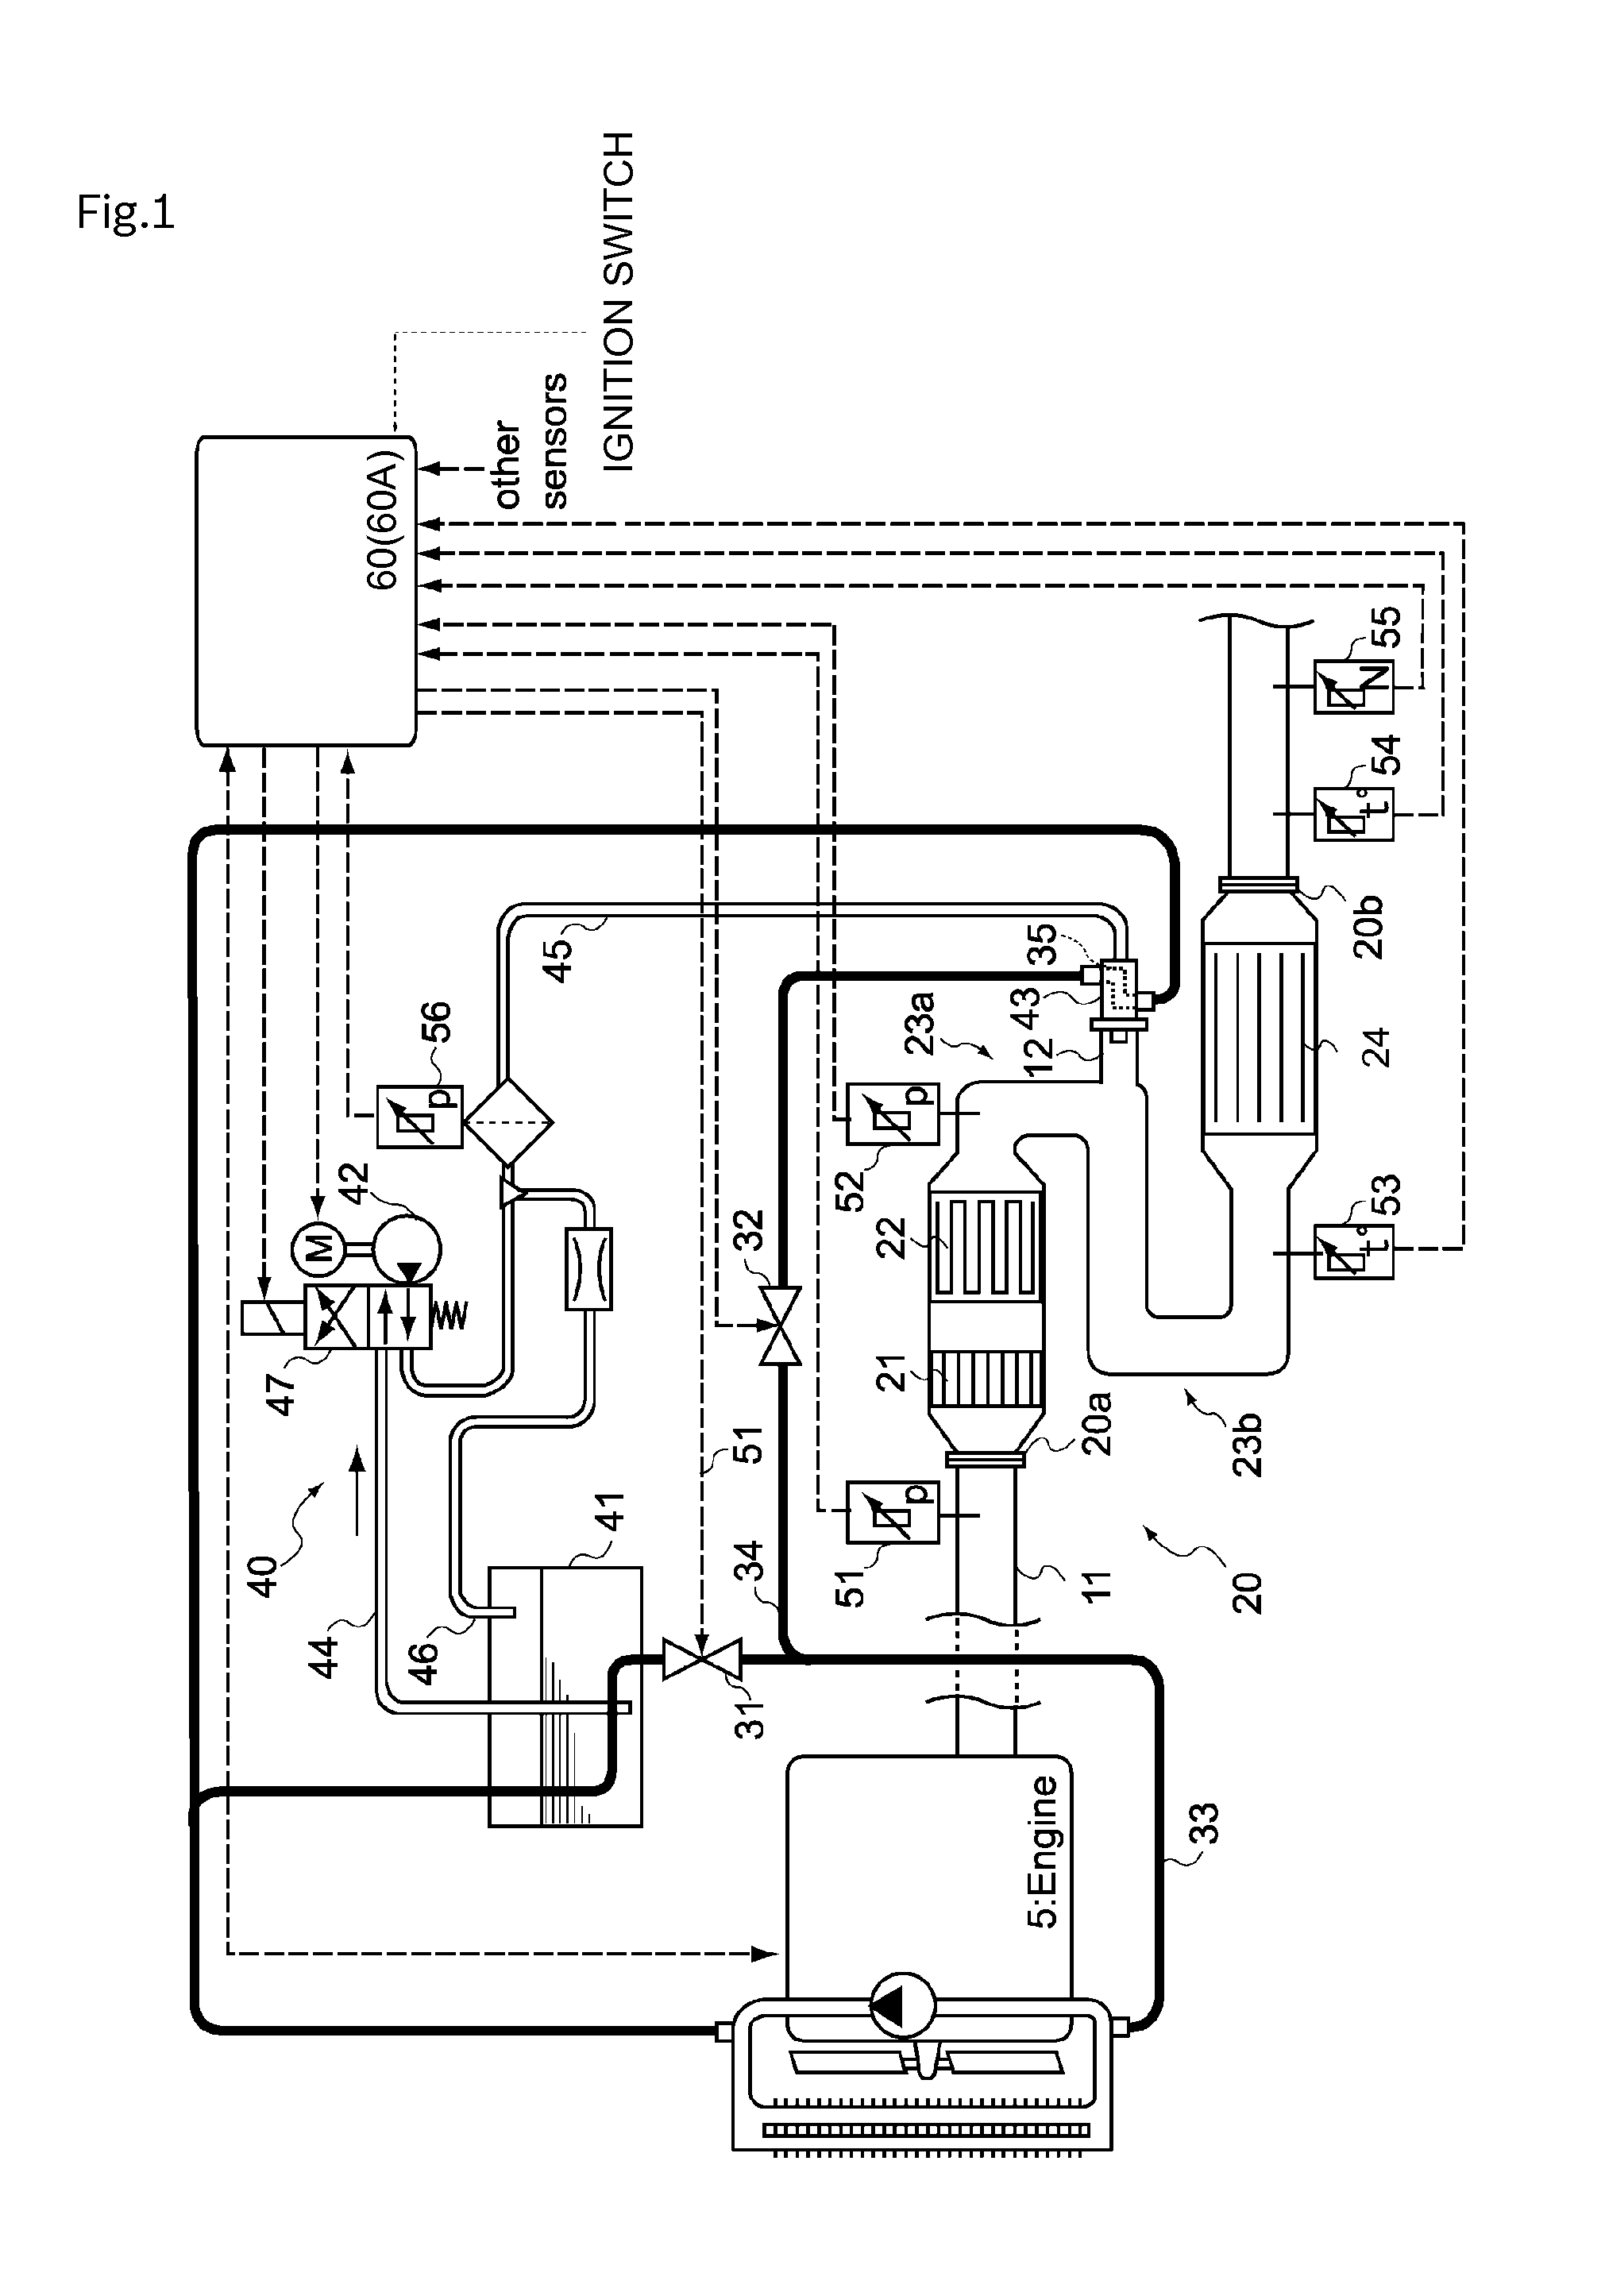 Exhaust gas purification system and method for controlling the same